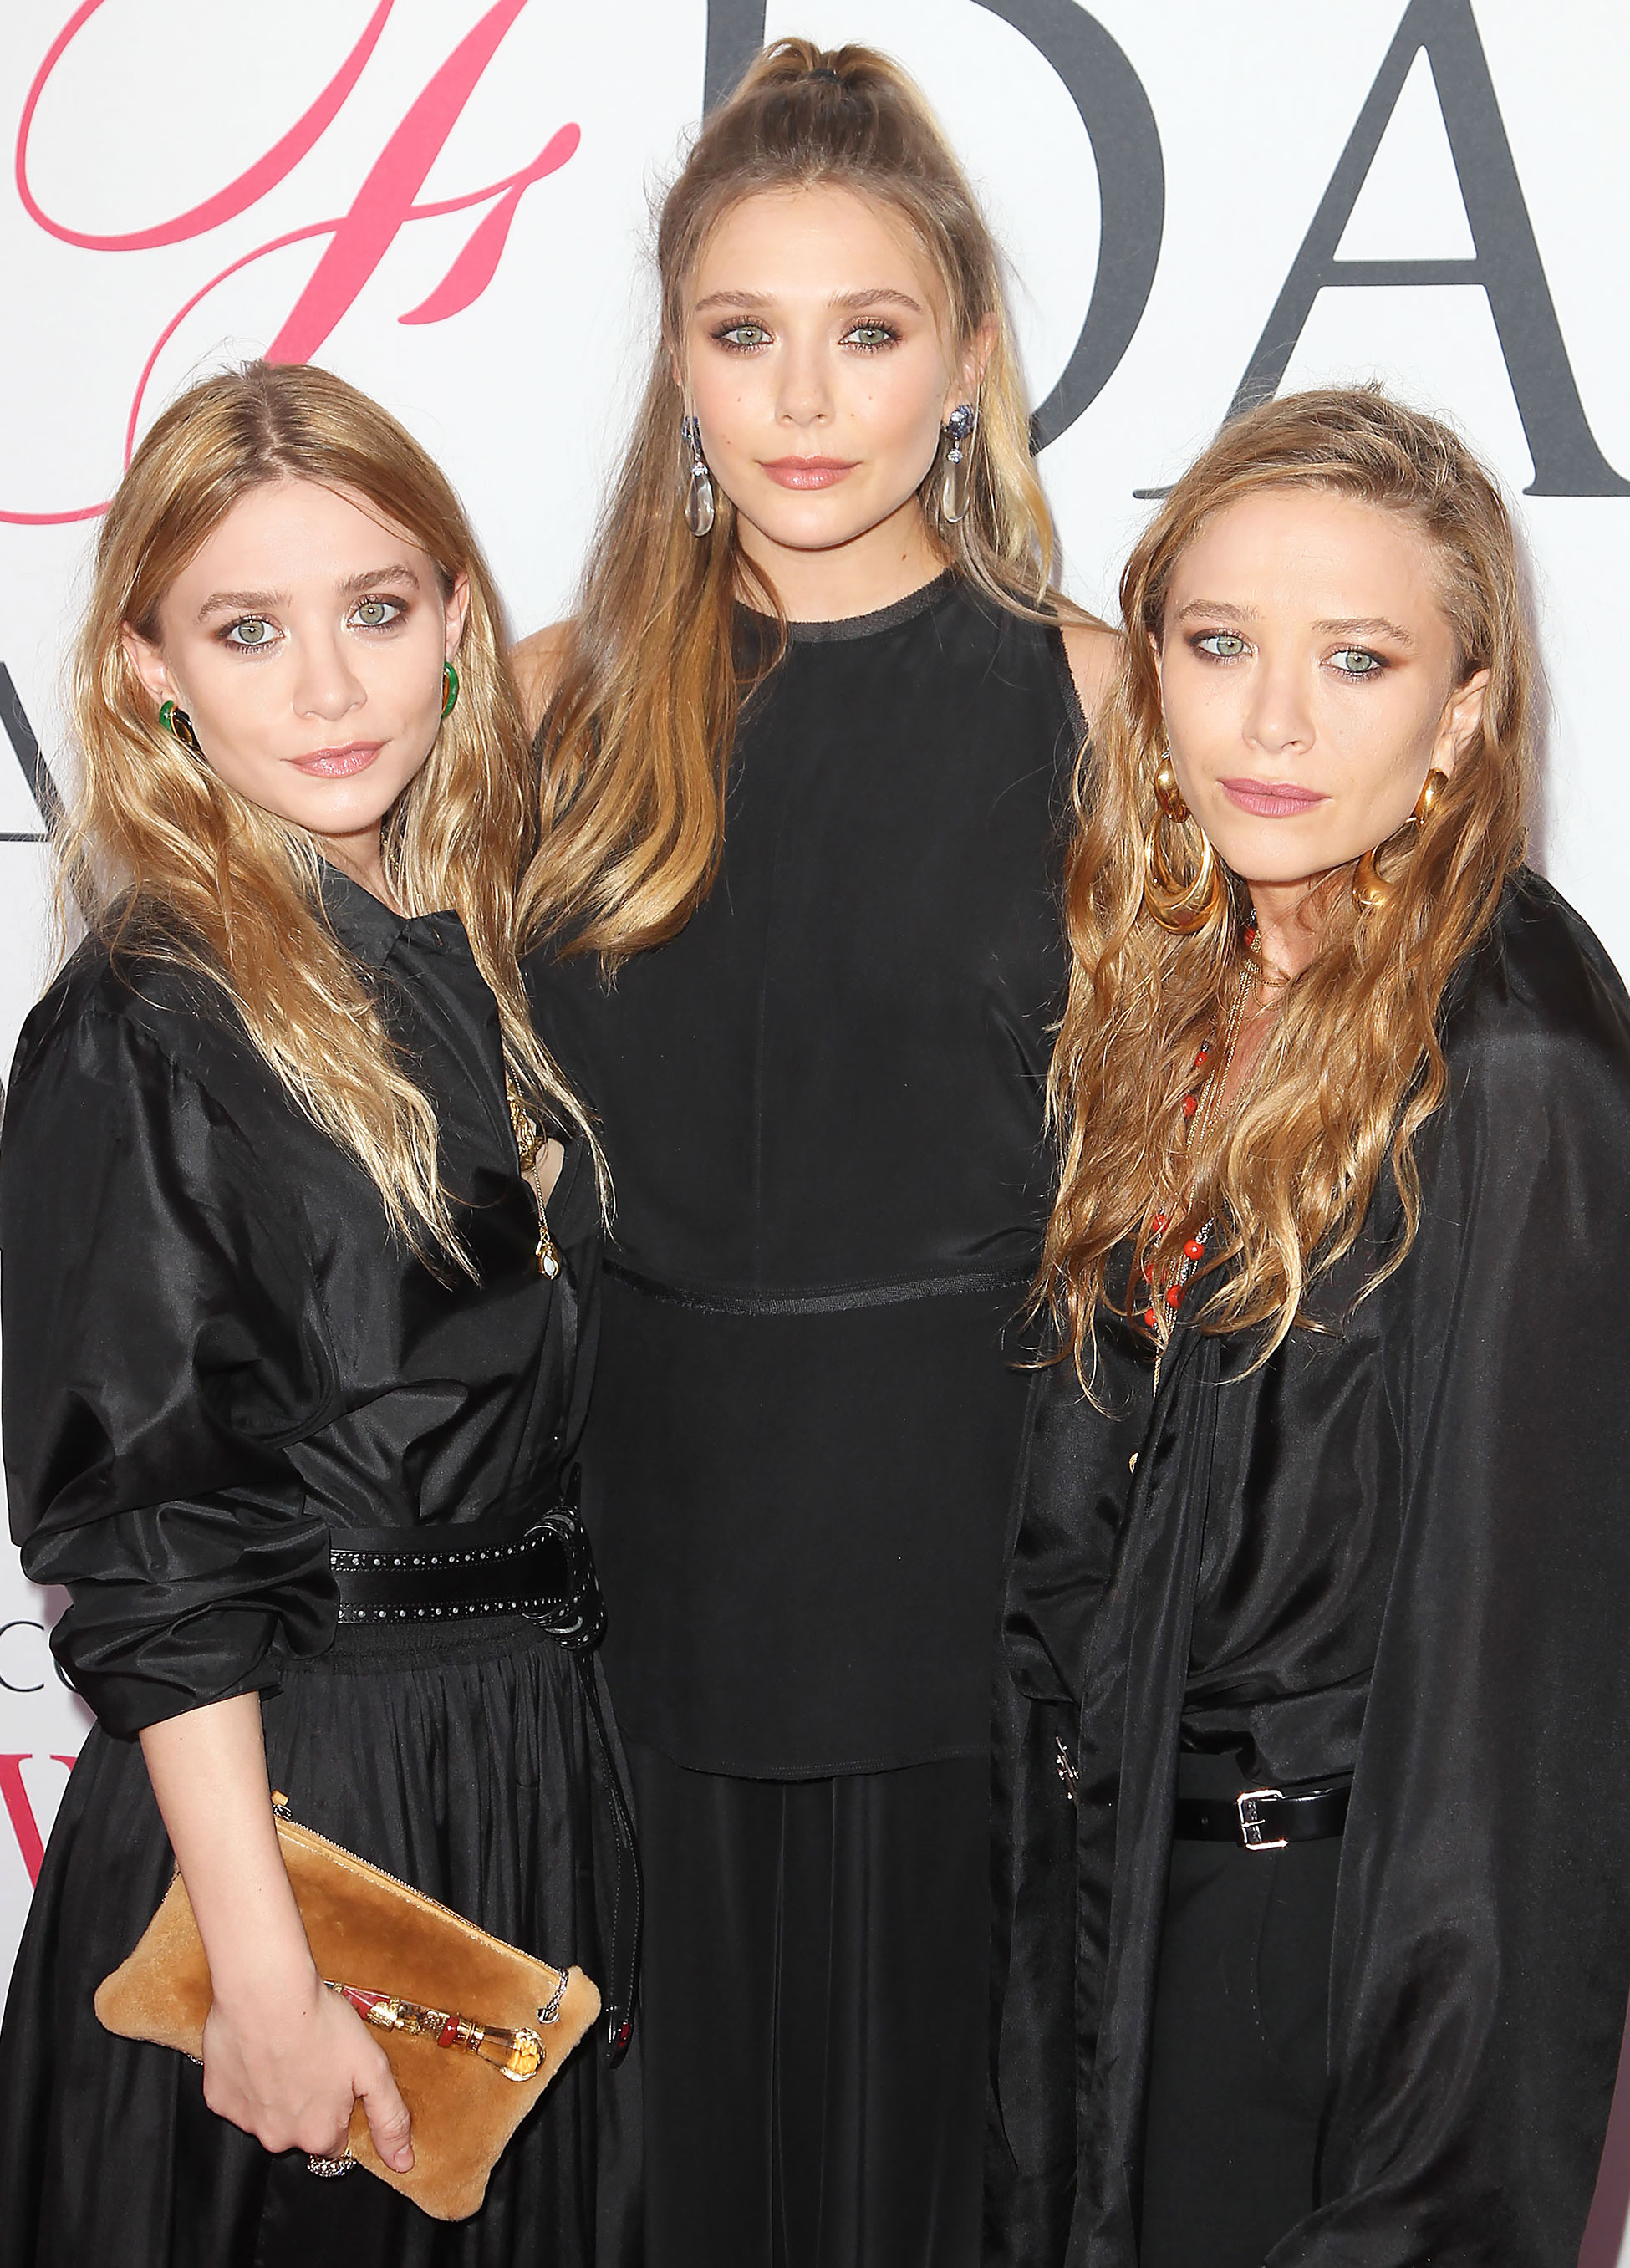 Mary Kate And Ashley Olsen Nude Fakes